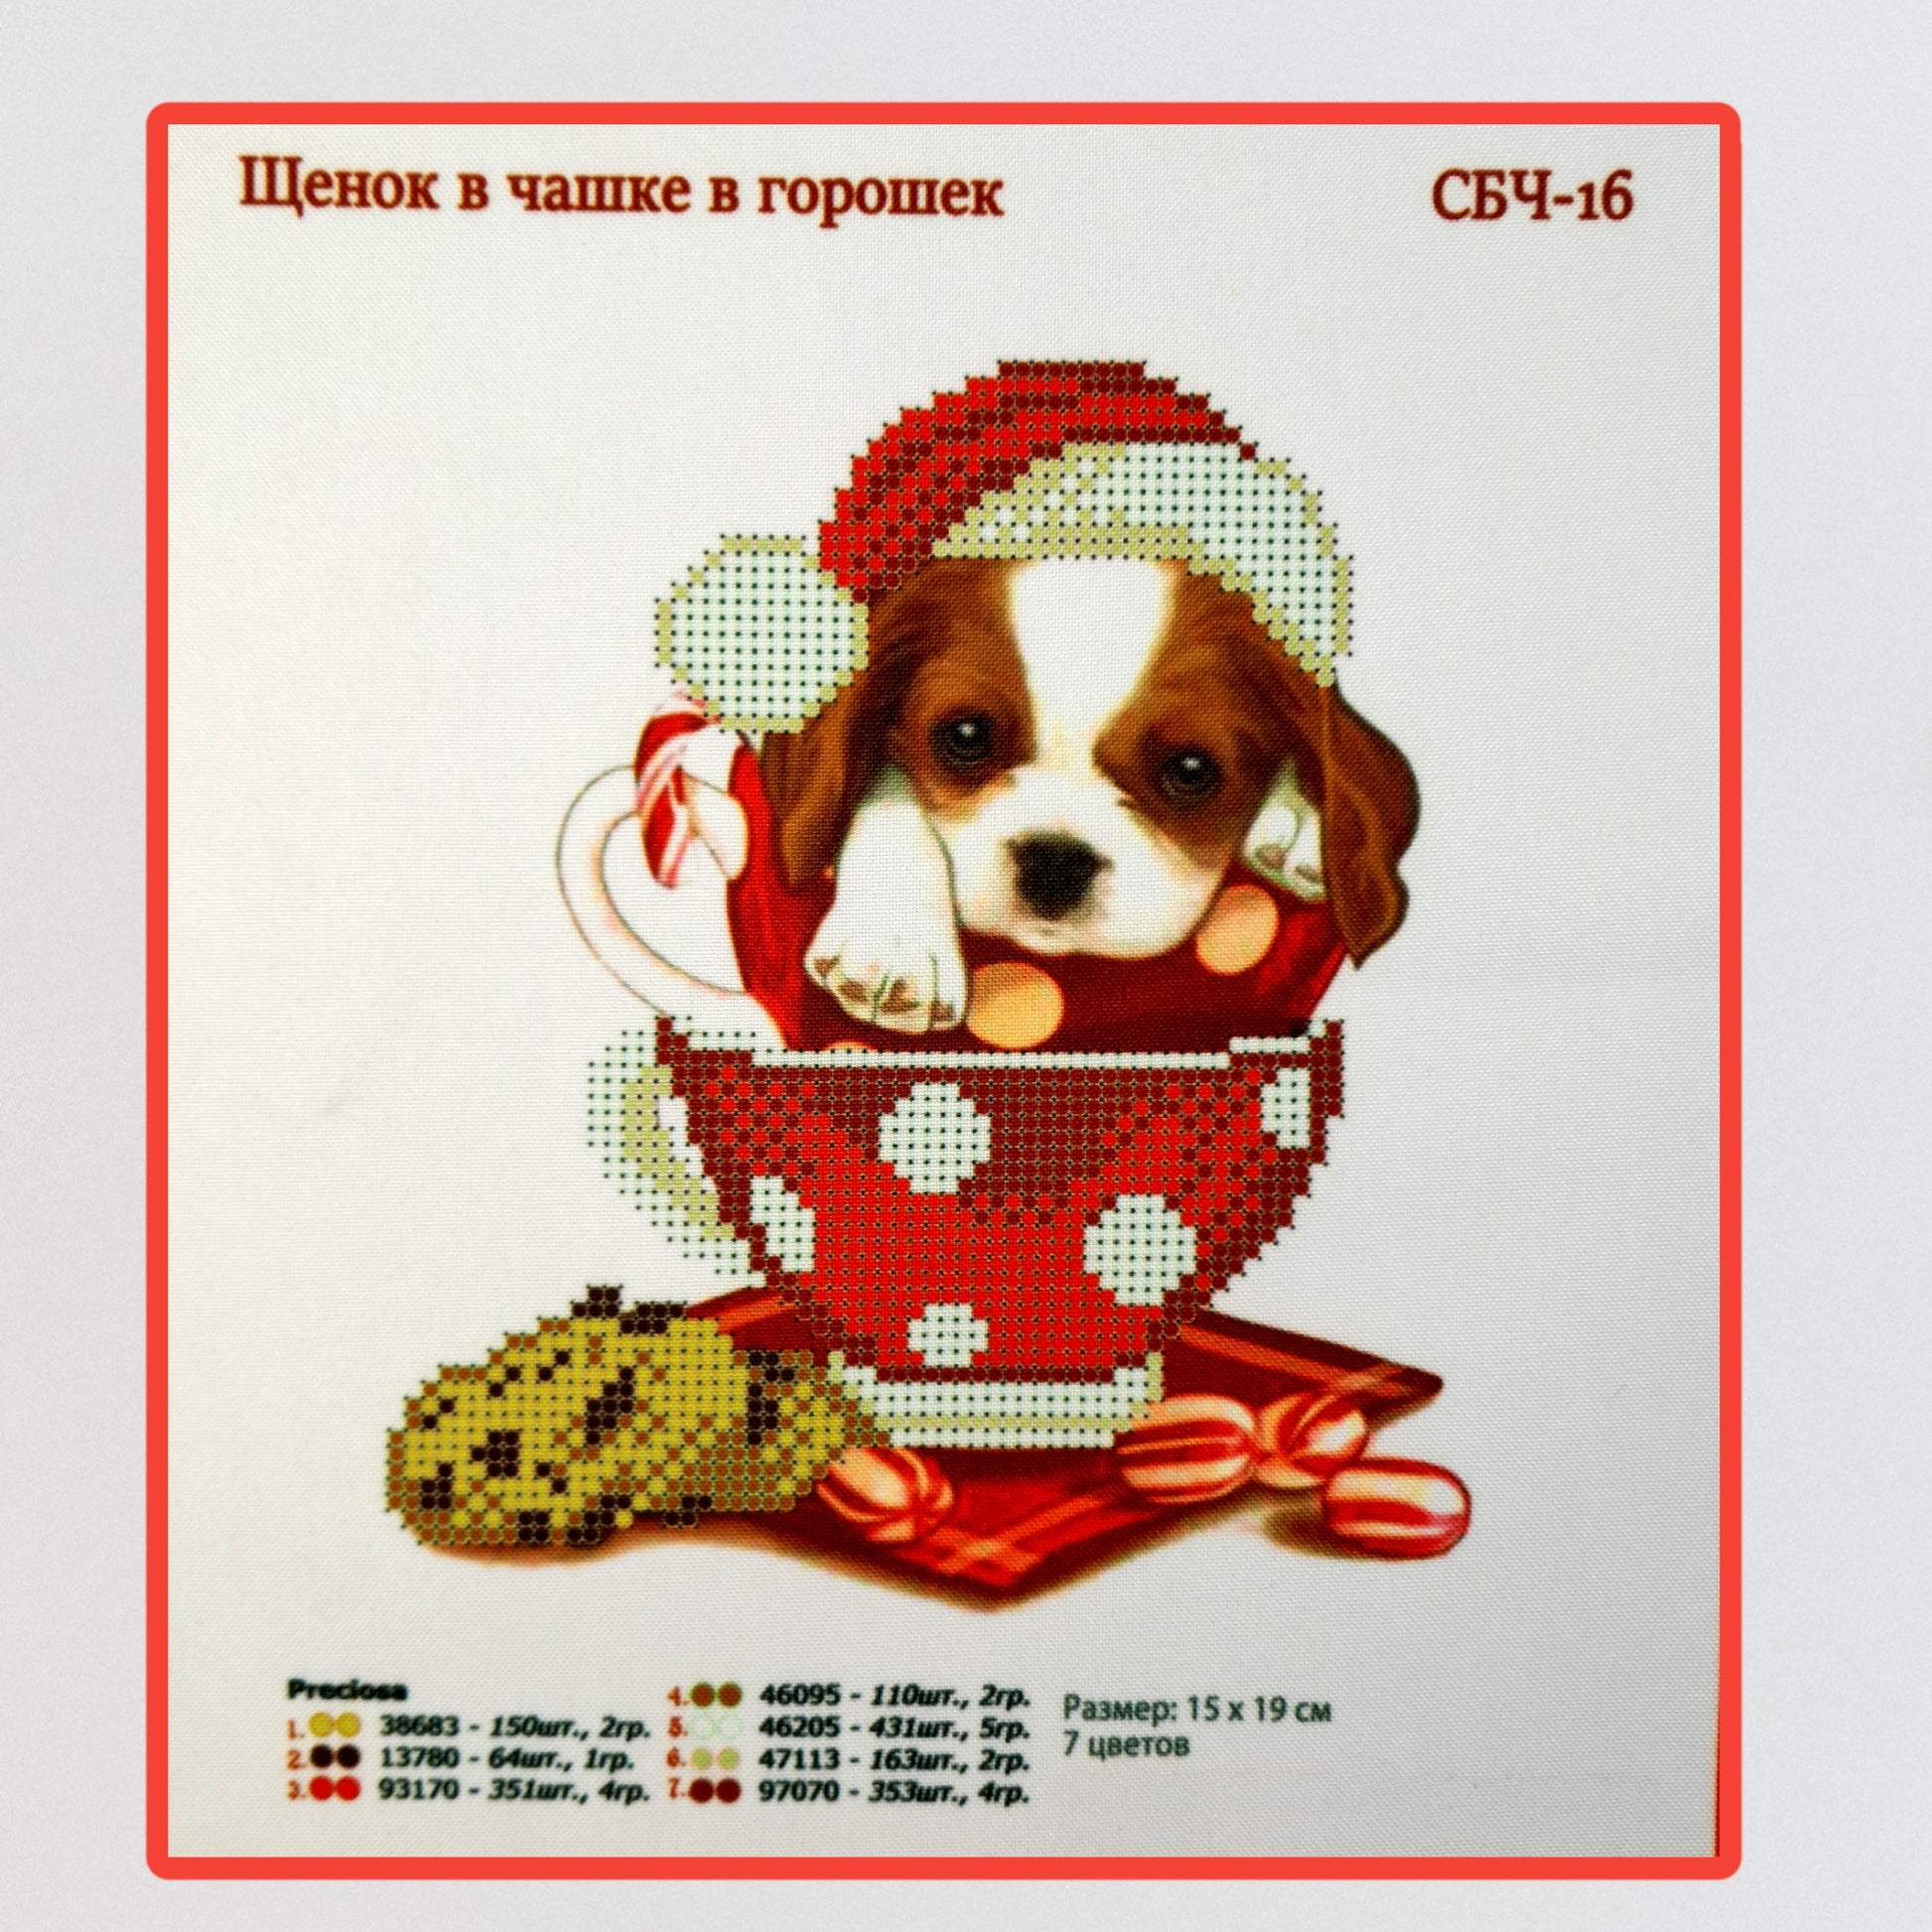 DIY Bead embroidery kit  "Puppy in a cup". Size: 5.9 - 7.5 in (15 - 19cm) - VadymShop